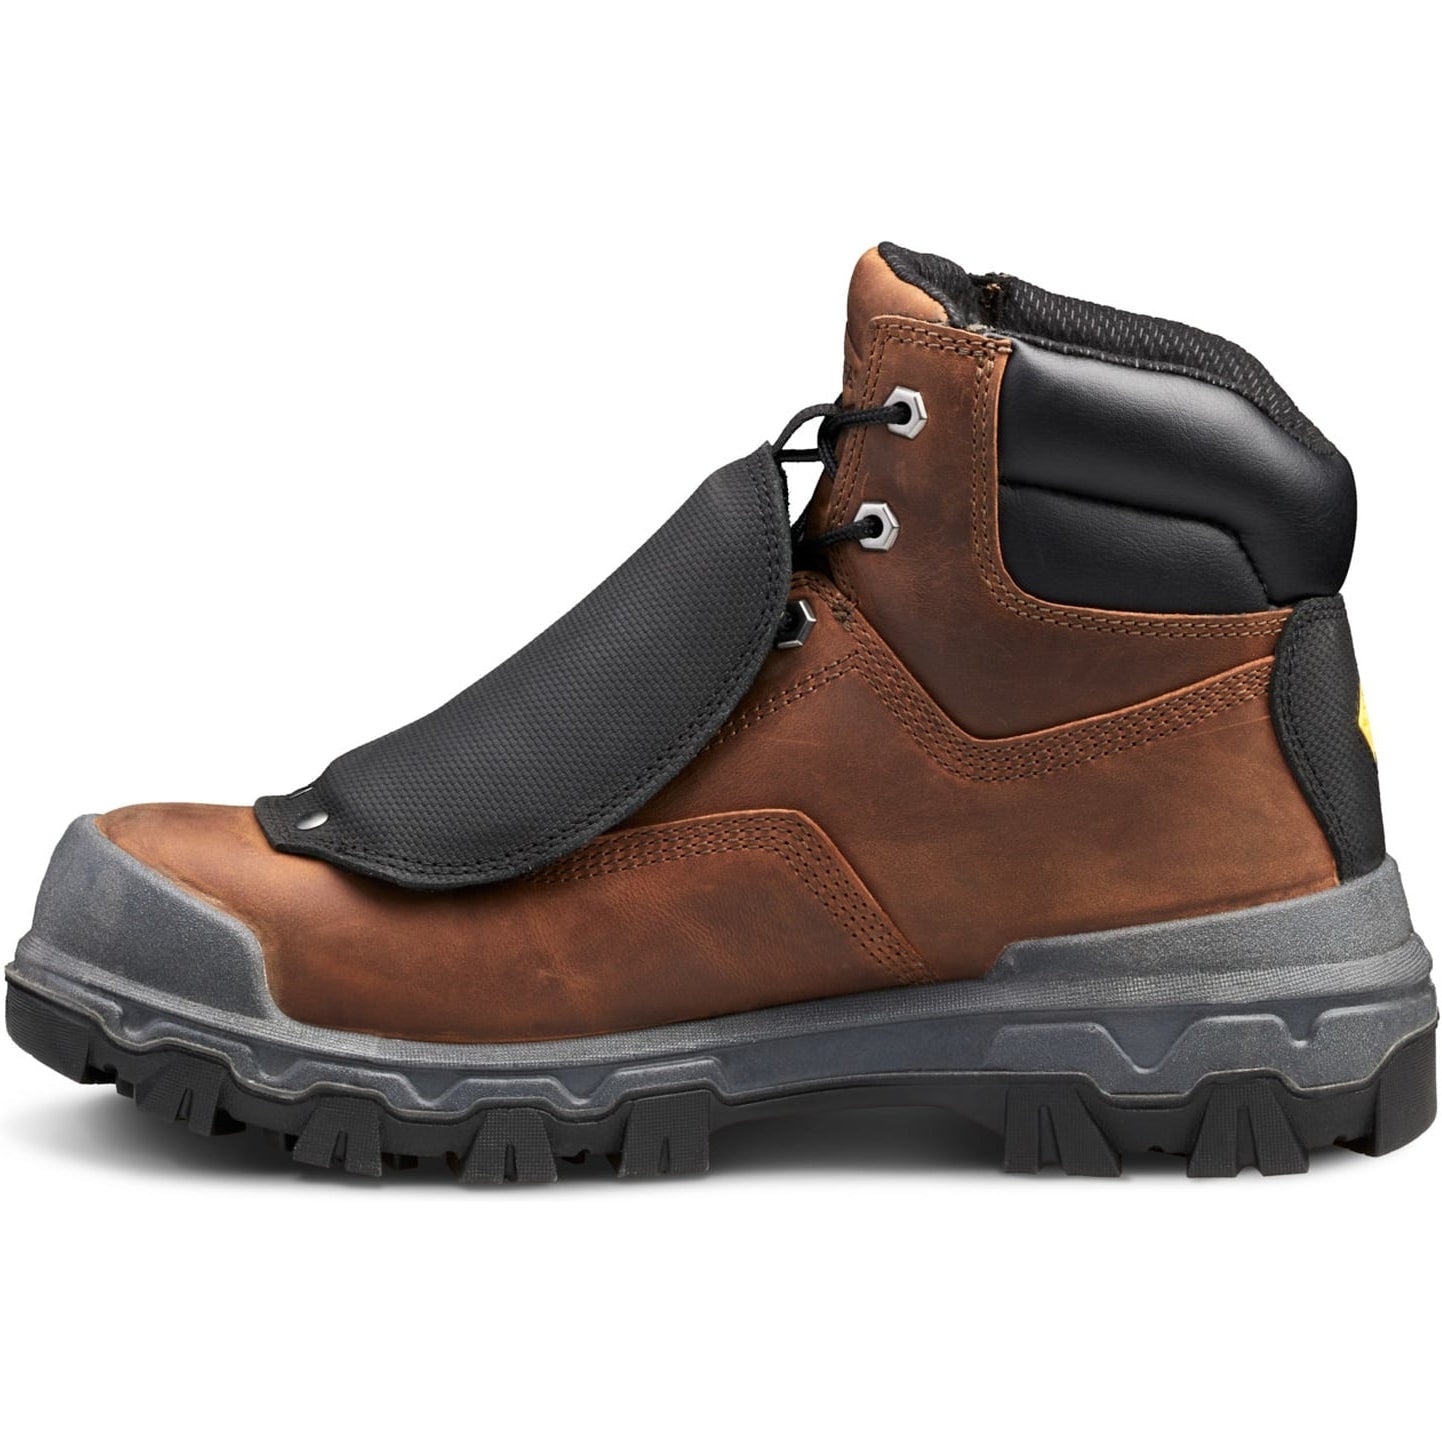 Terra Men's Sentry 2020 6" Comp Toe WP Safety Work Boot -Brown- 4NRXBN  - Overlook Boots